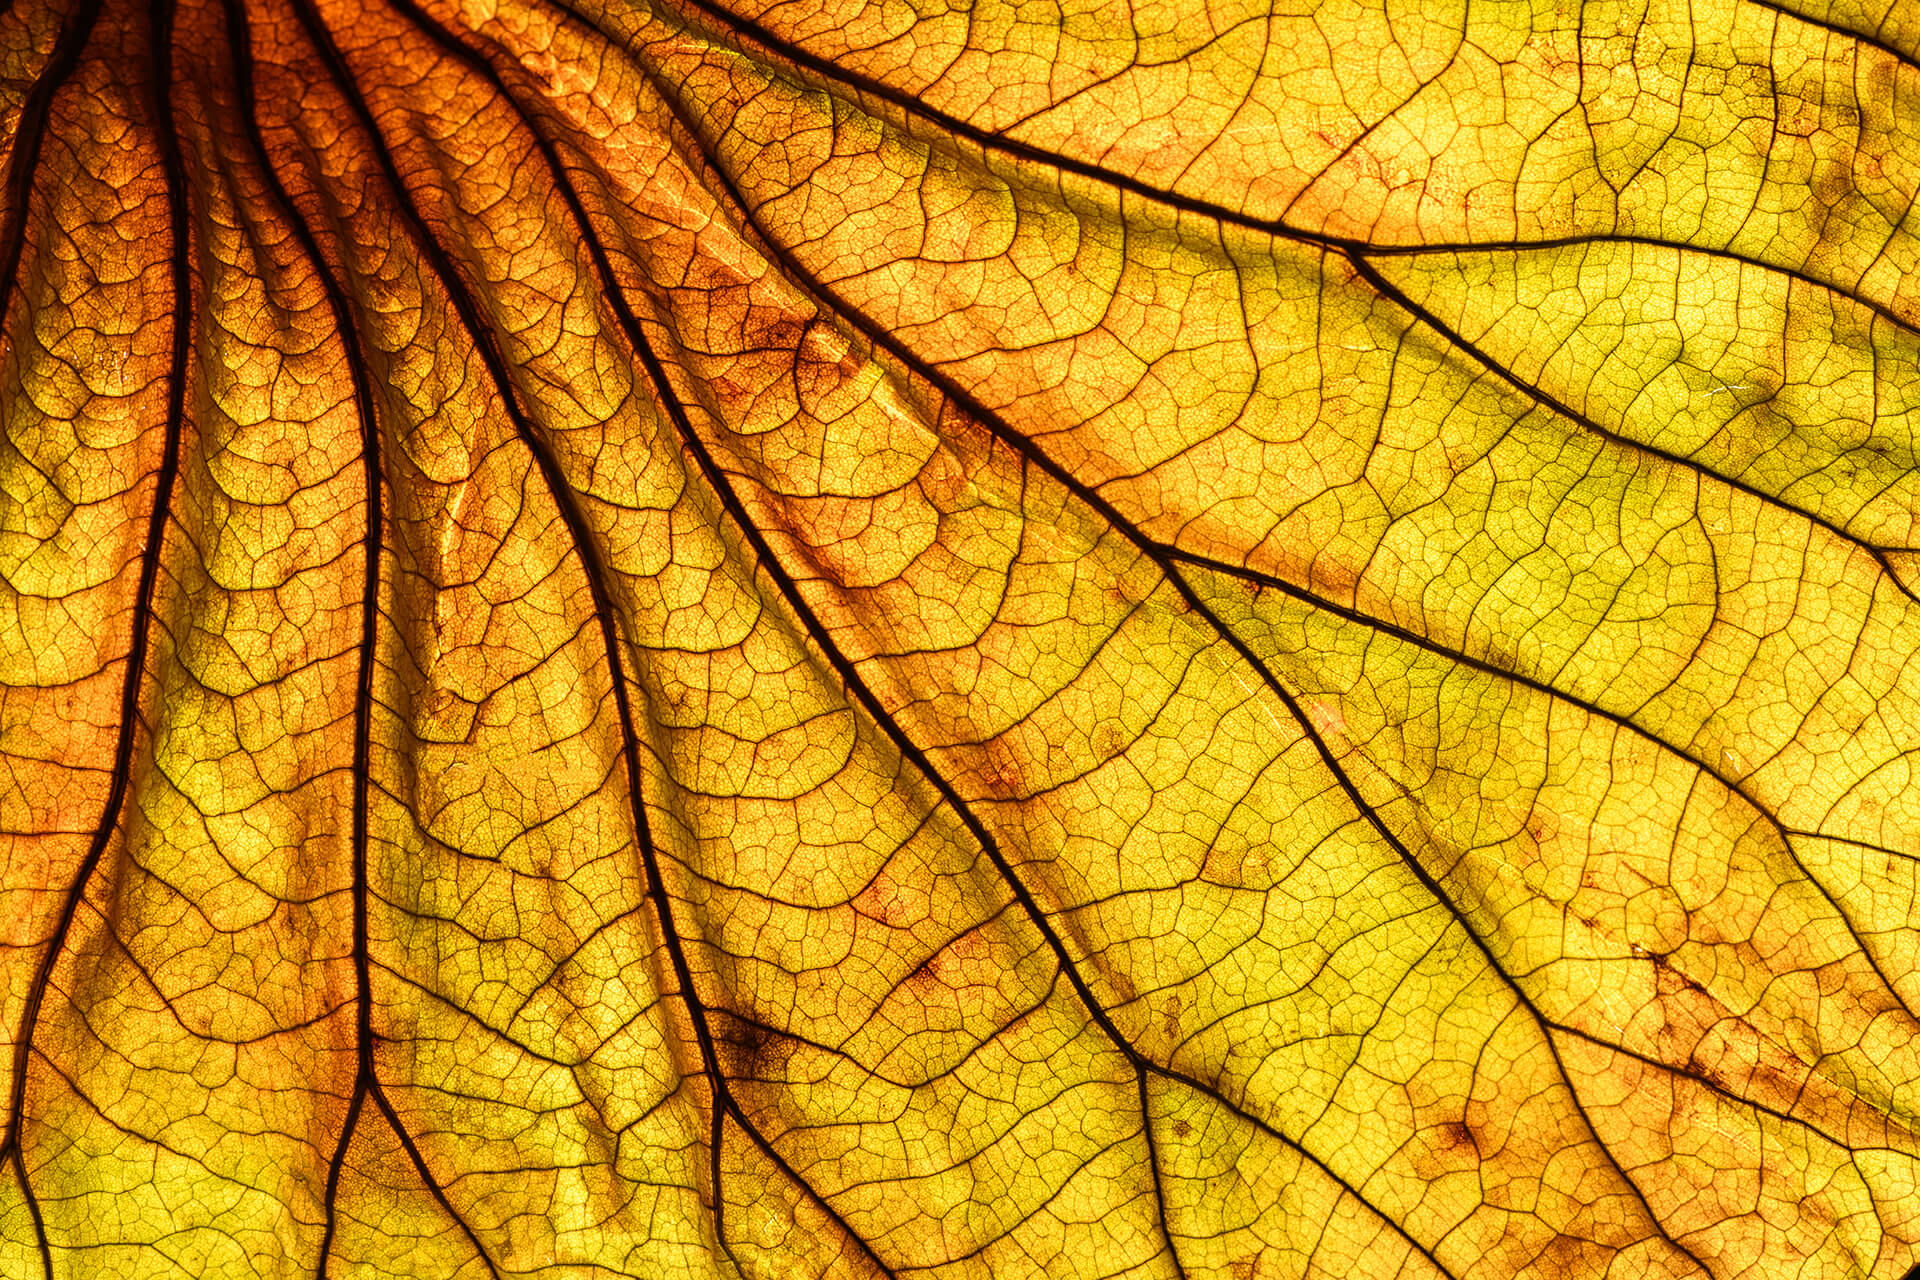 A yellow leaf in close up